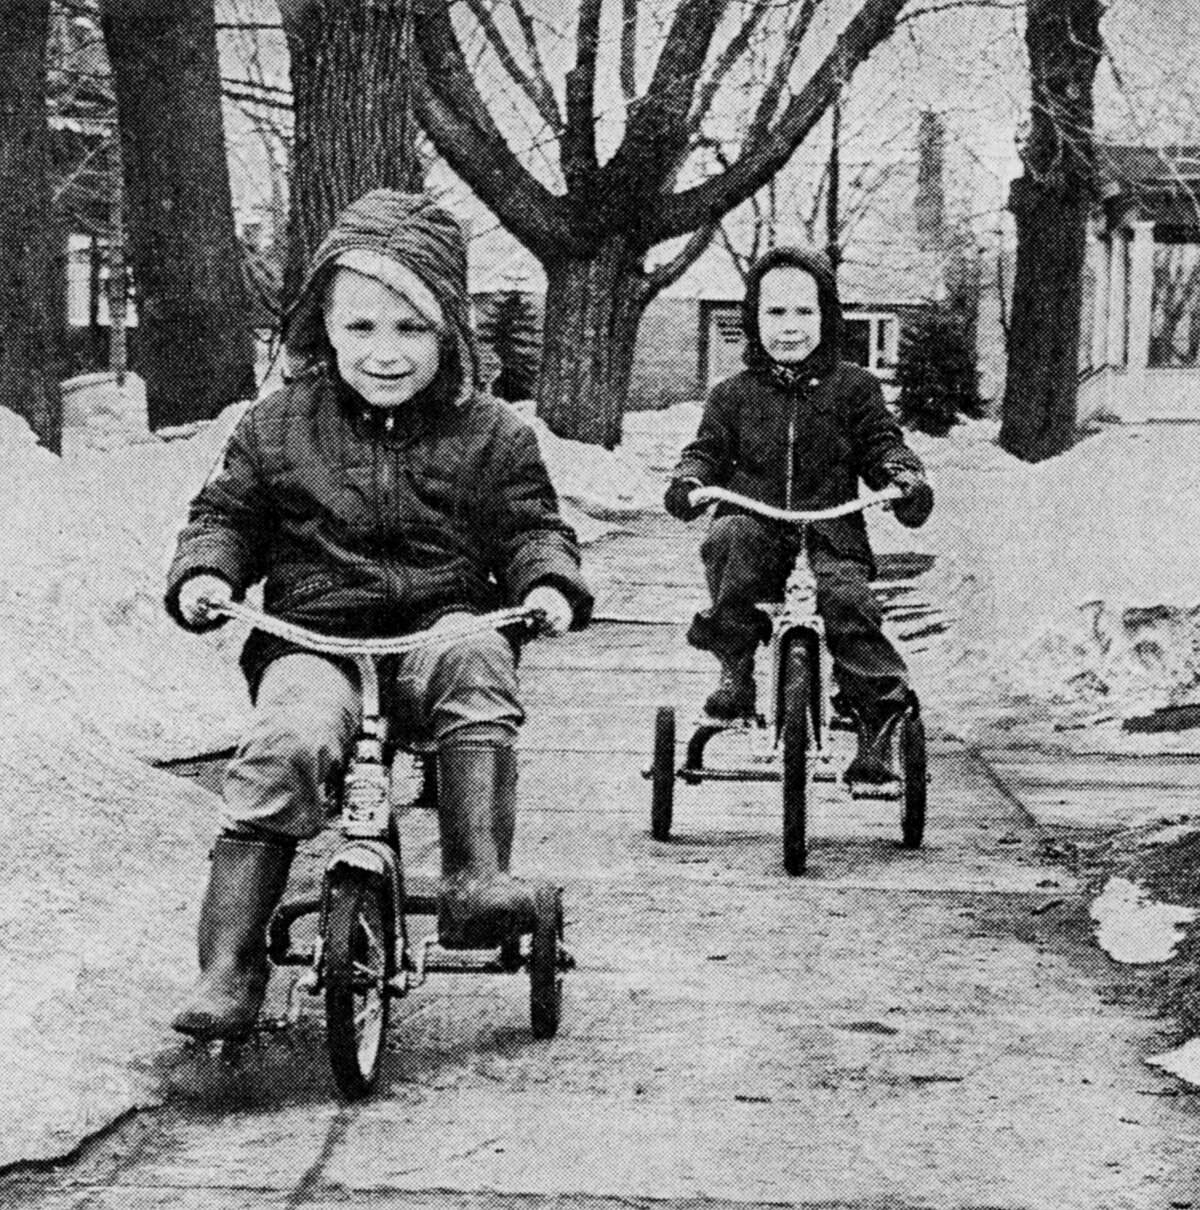 With the arrival of dry sidewalks in some areas, these youngsters bring in spring in typical fashion with a bike ride. Timothy Bedingham (front) and Peter Brastrom are shown riding bicycles between the still evident snow banks. The photo was published in the News Advocate on March 20, 1962.